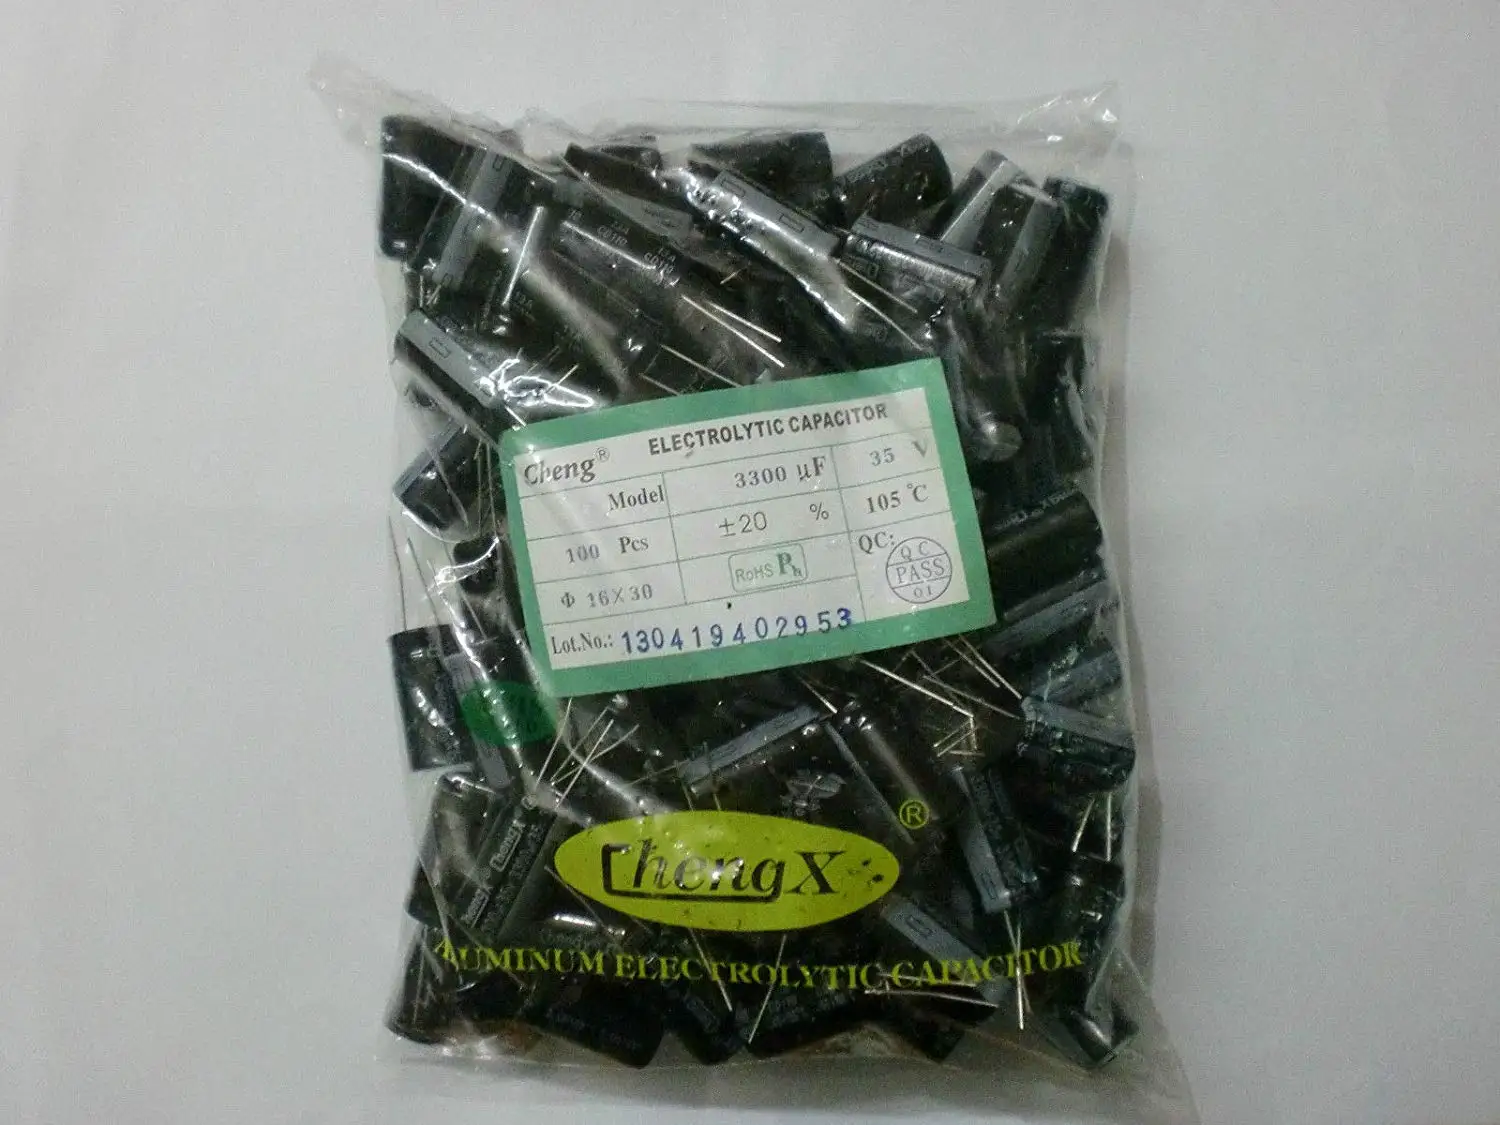 20pcs for SANYO SEPC 100uf//16V 6.3x6mm Aluminum Polymer Solid Capacitor 6349